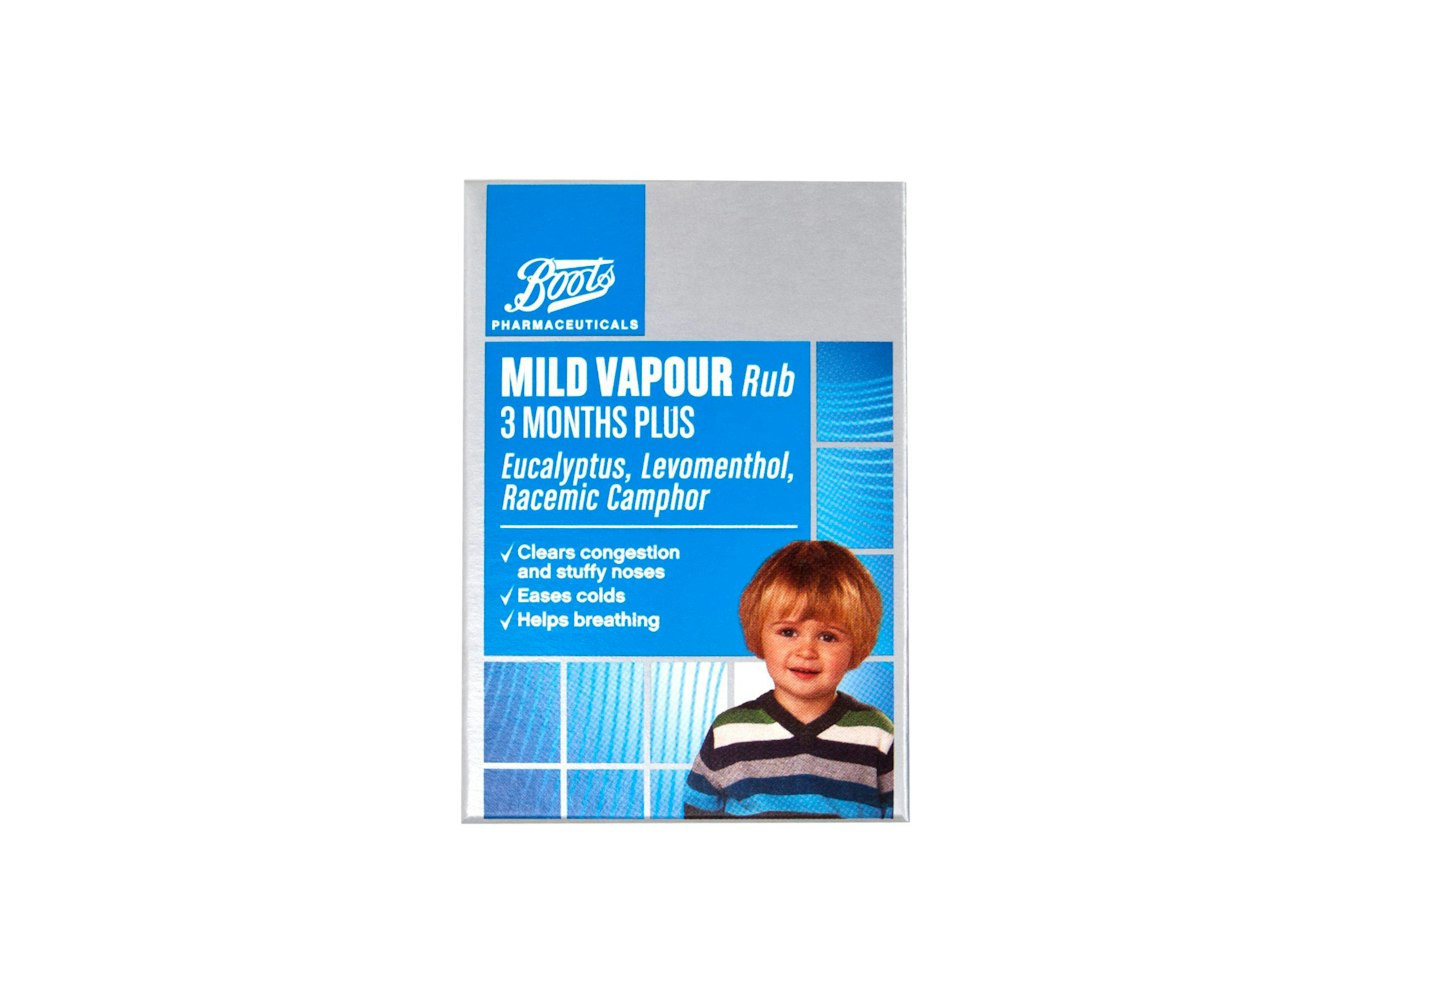 This vapour rub contains a combination of volatile oils for effective cold relief. It can be used to clear congestion, blocked noses and coughs due to colds. Rub a small amount into your toddler’s chest and back, when needed. Especially useful if applied